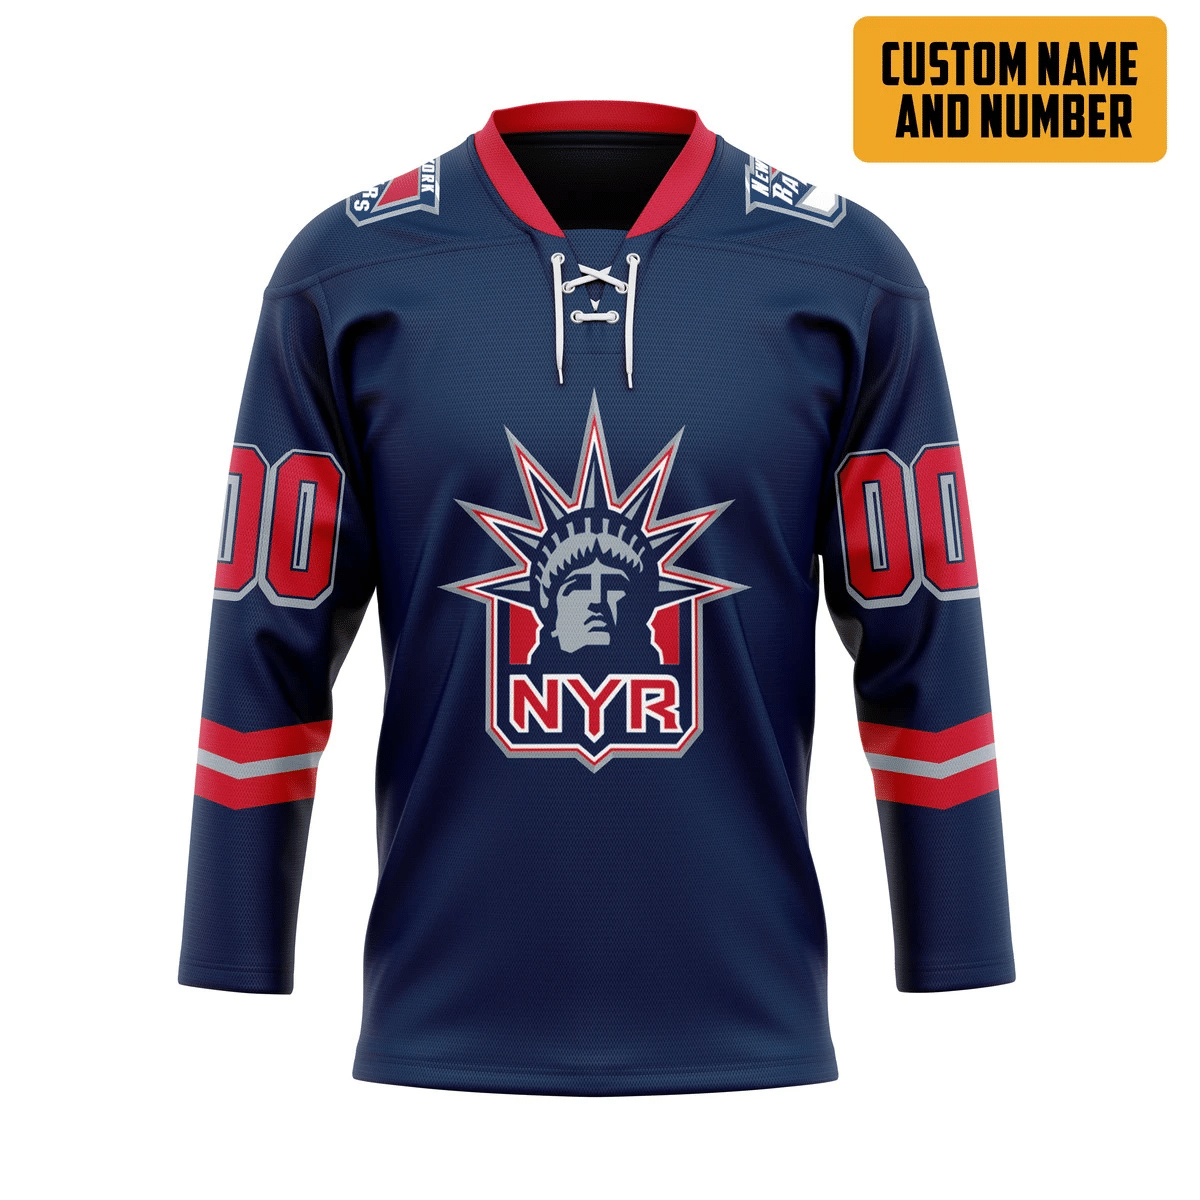 The hockey jersey is one of the most important items to have as a sports fan. 195